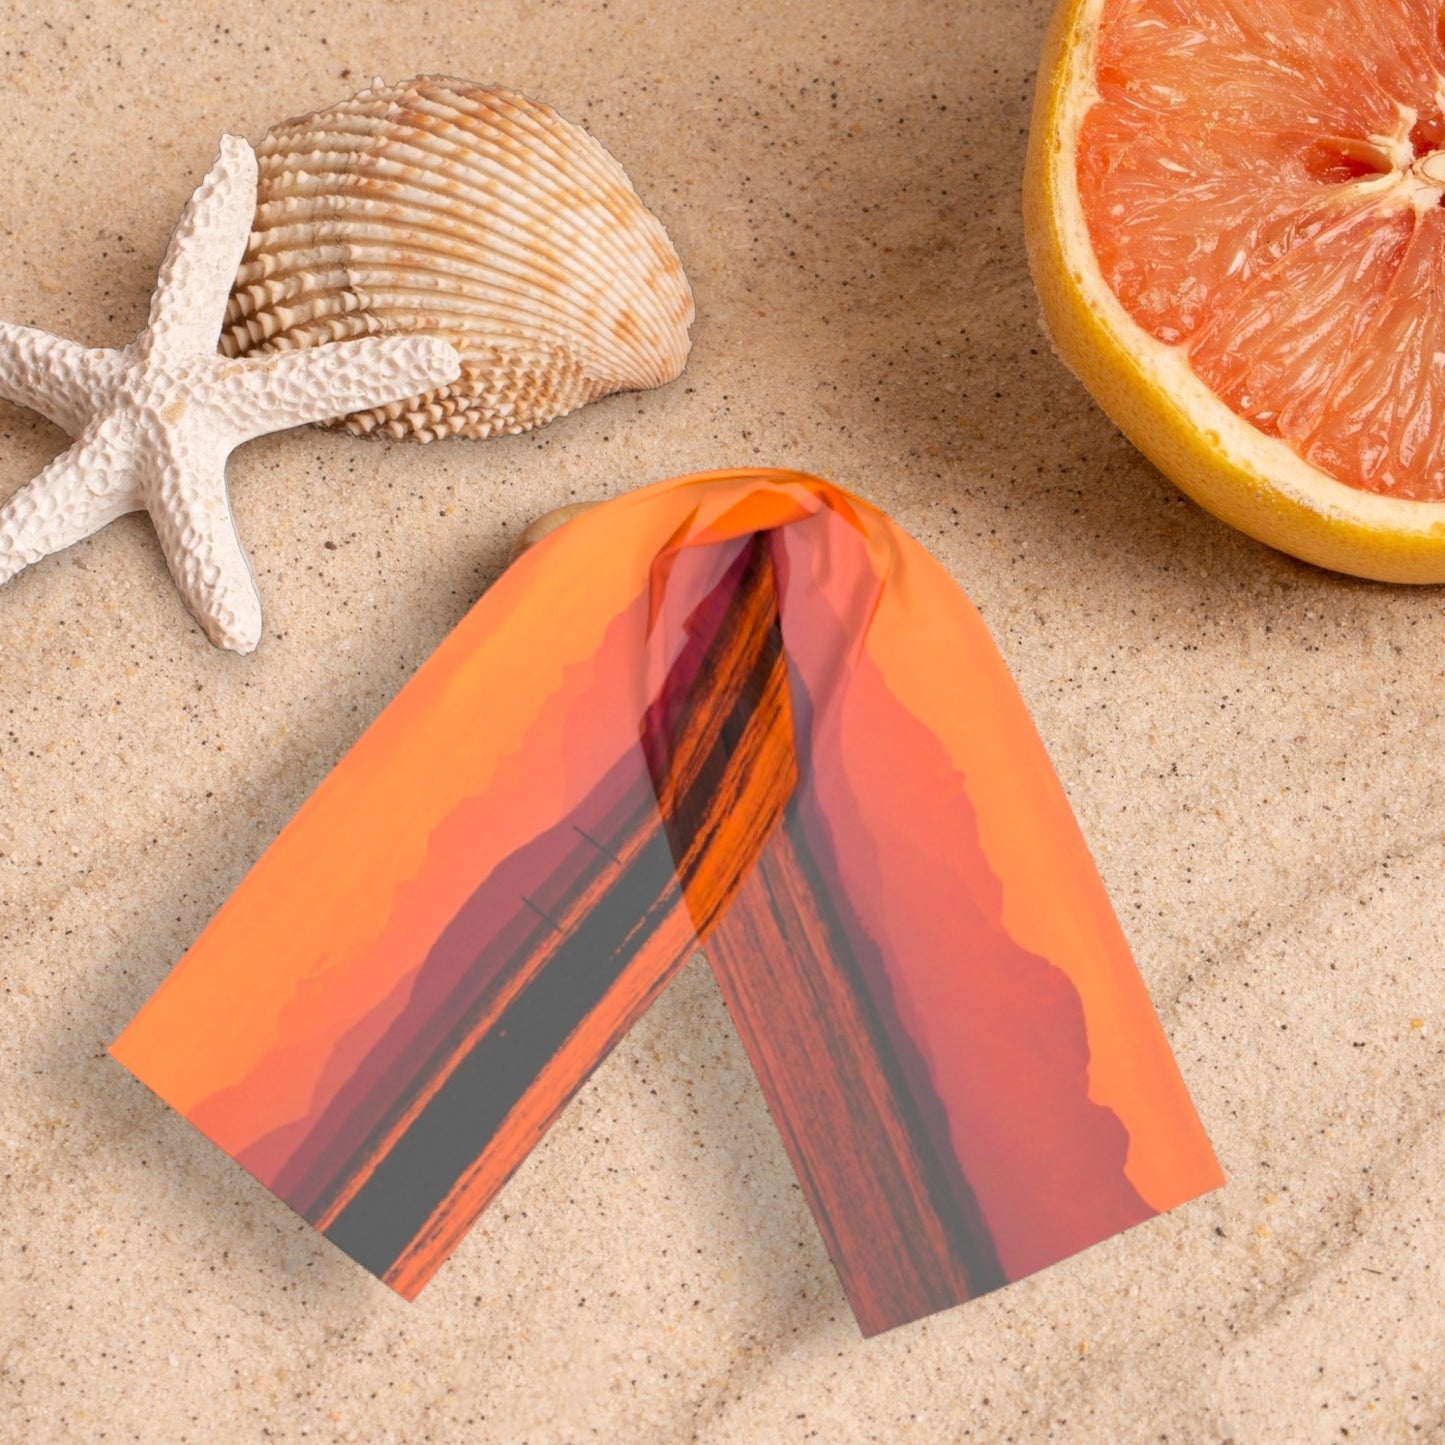 Saratoga Beach Sunset long scarf shown on the sand with seashells and fruit.